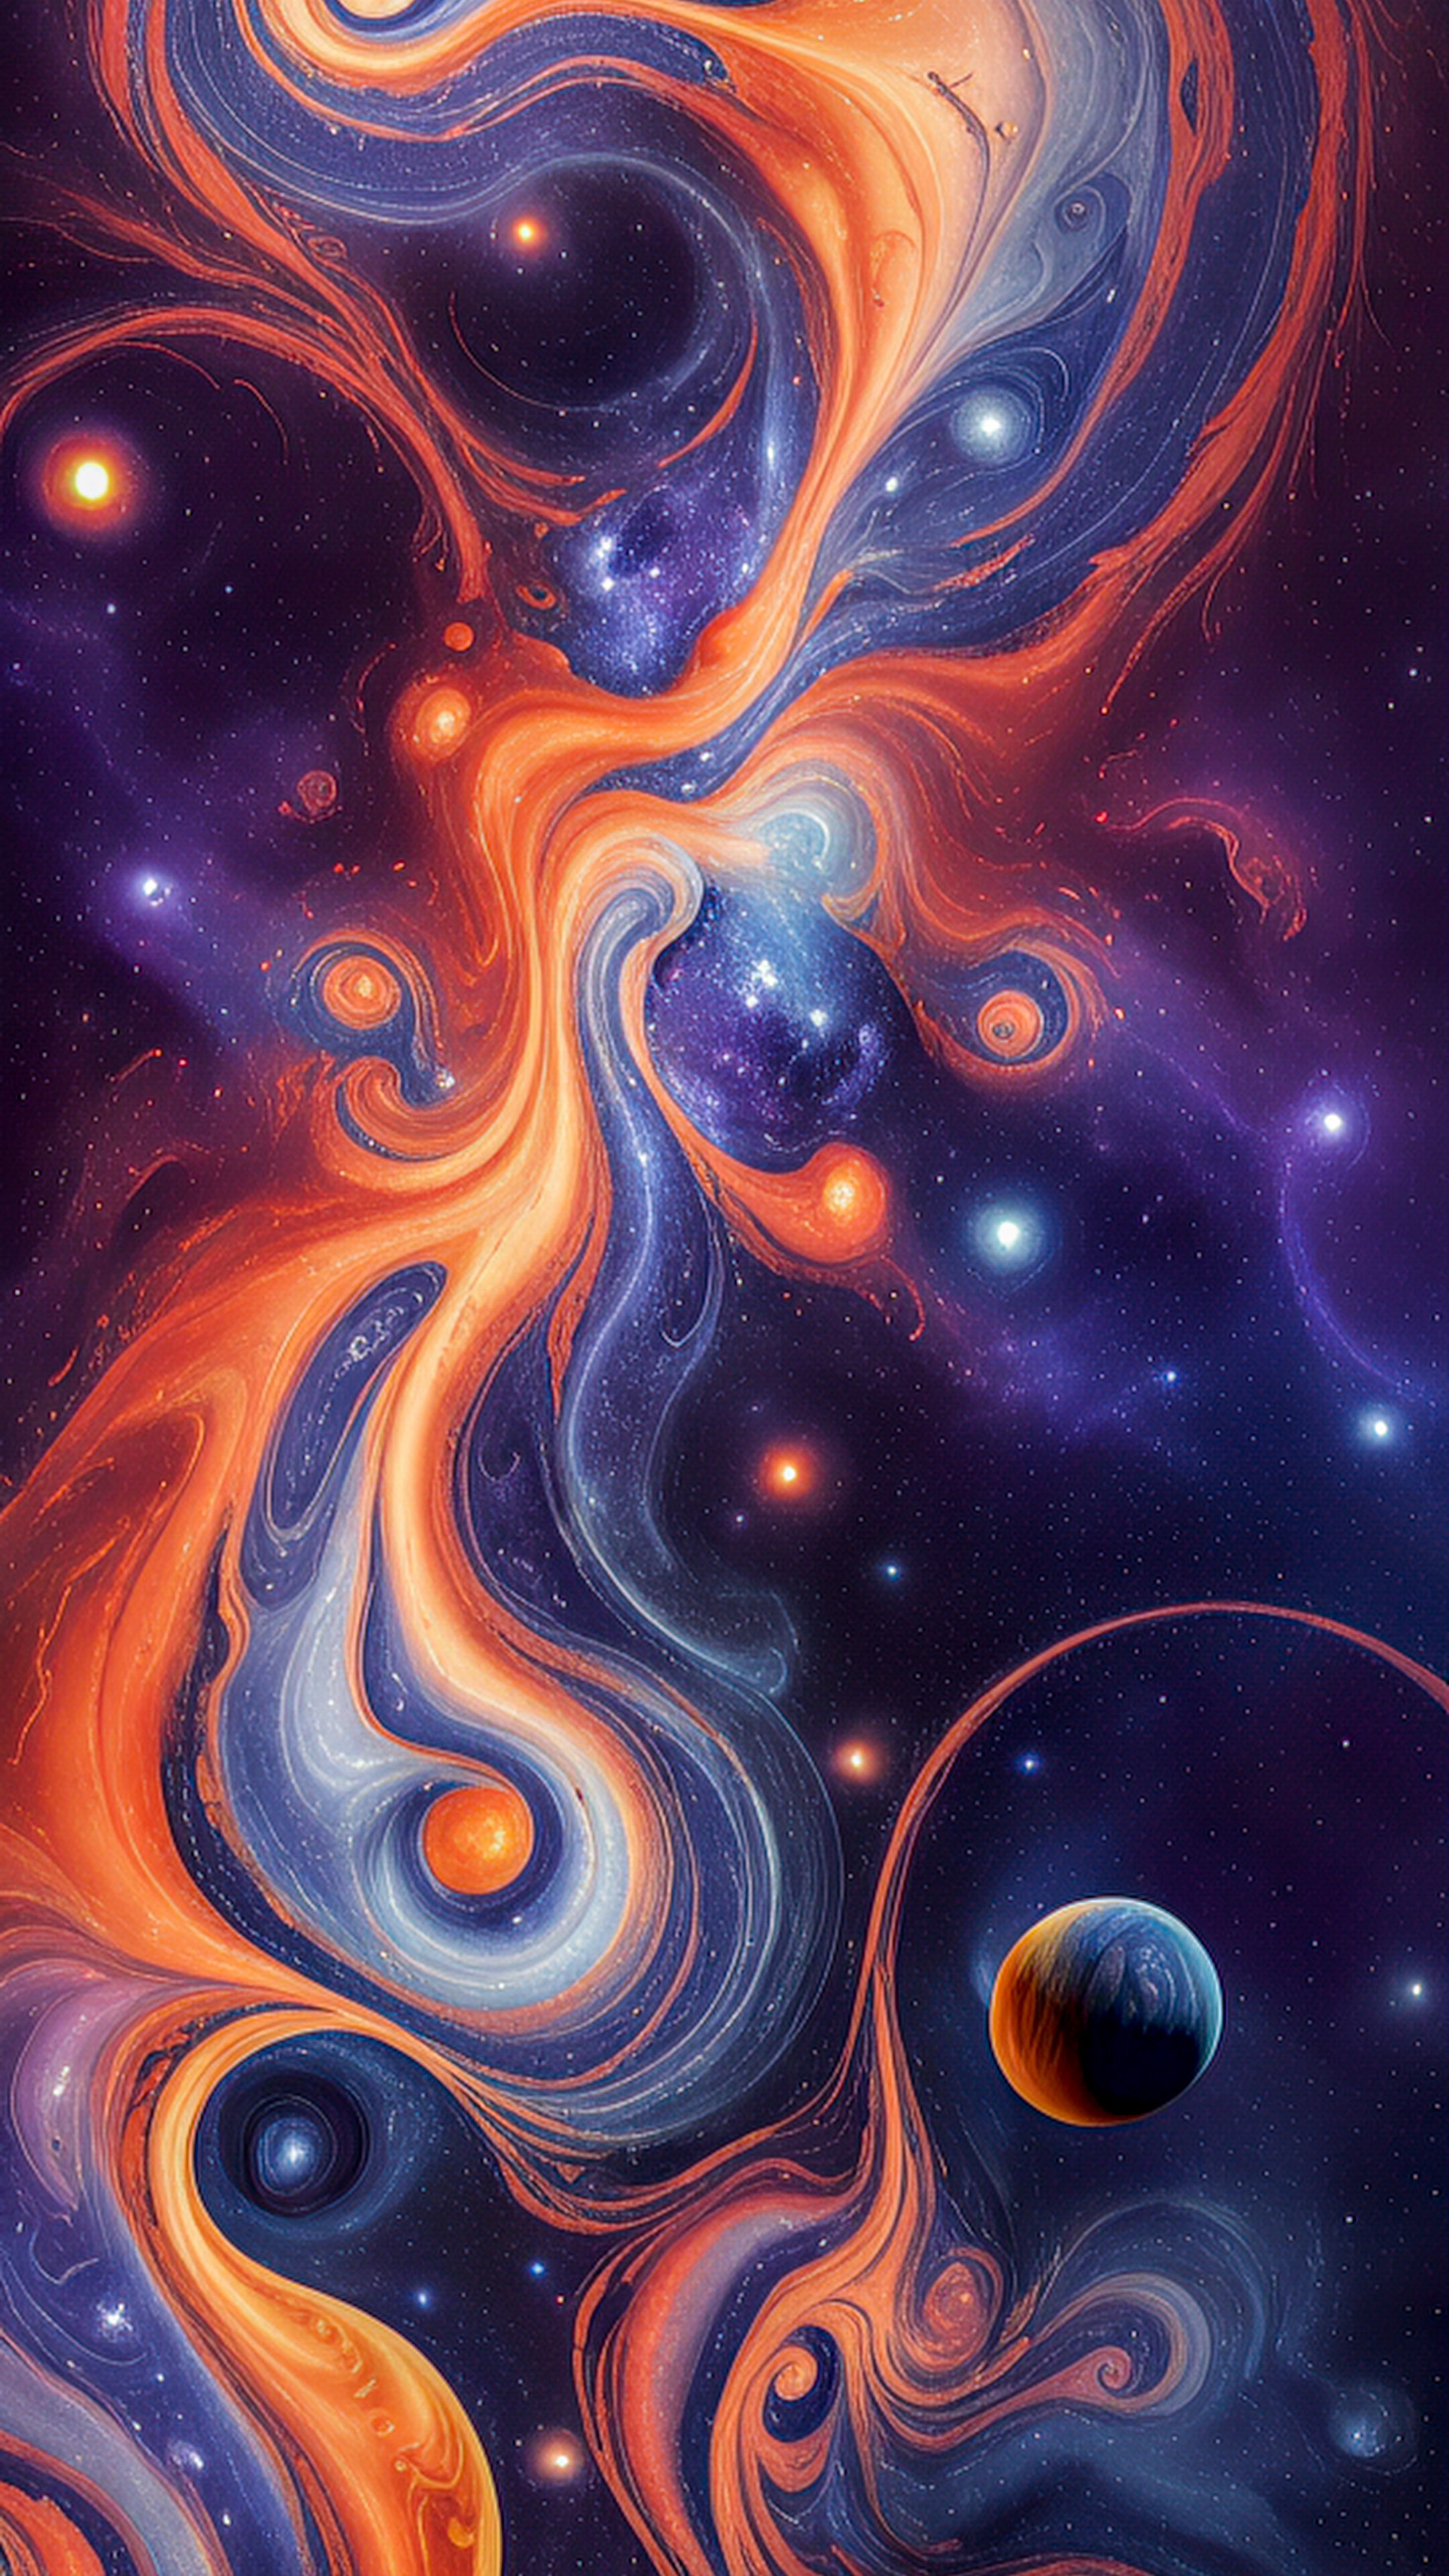 Transport your phone to the cosmos with our abstract wallpaper, featuring cosmic swirls, nebulae-like patterns, and deep space colors.